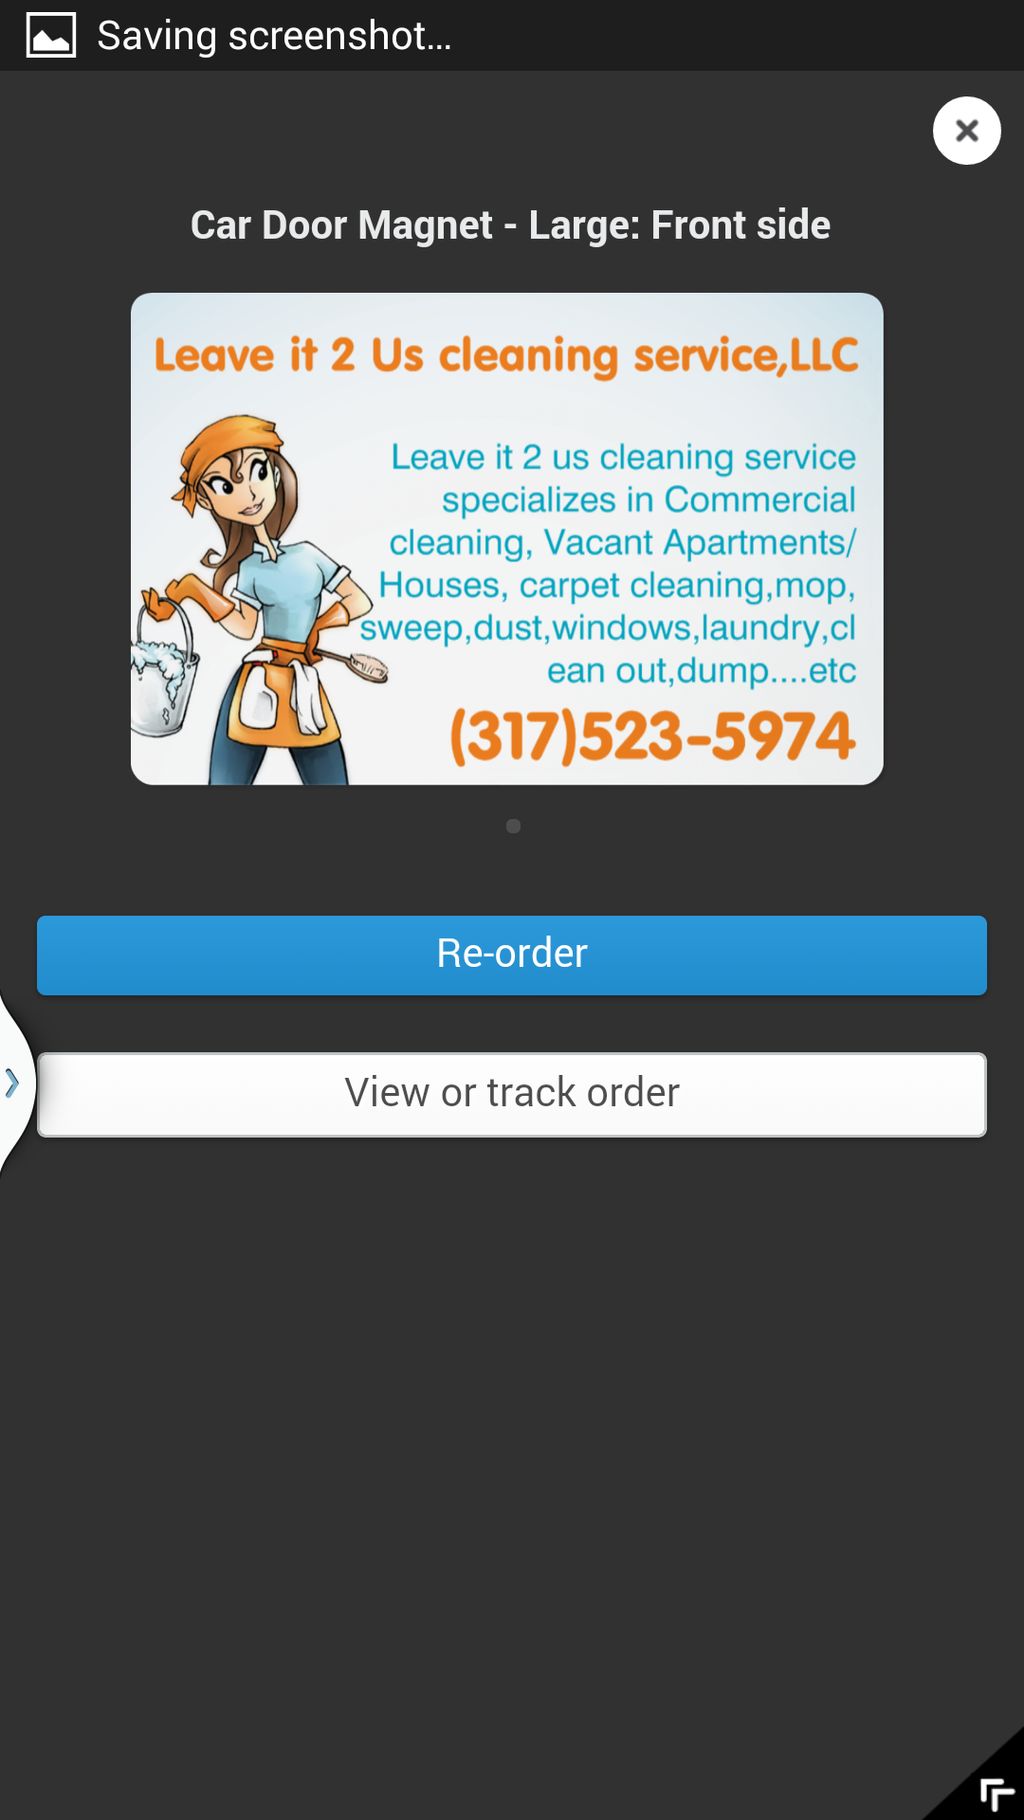 Leave It 2 Us Cleaning Service, LLC